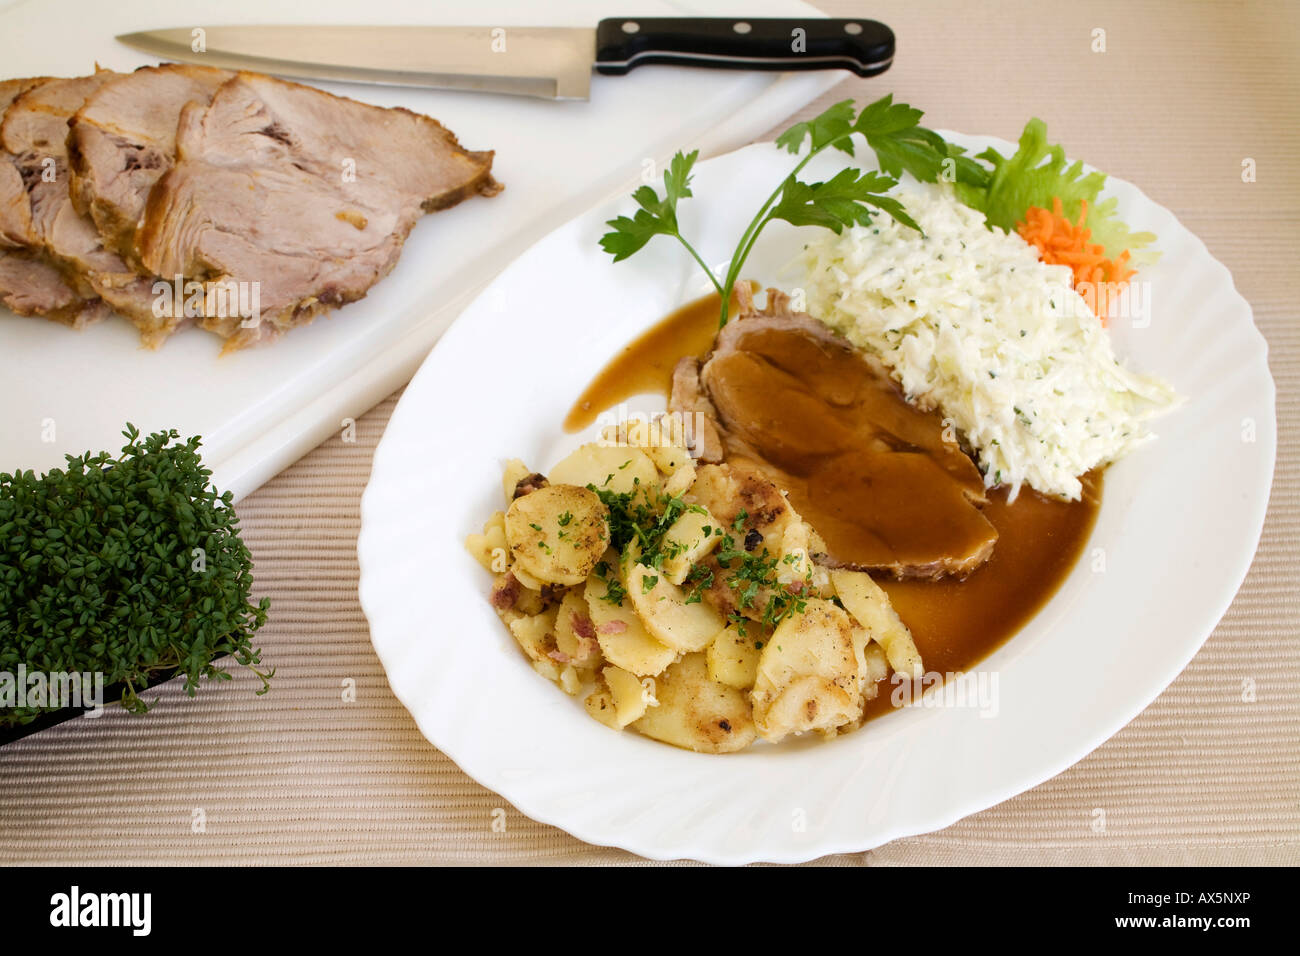 Pork roast with gravy, coleslaw and roasted potatoes Stock Photo